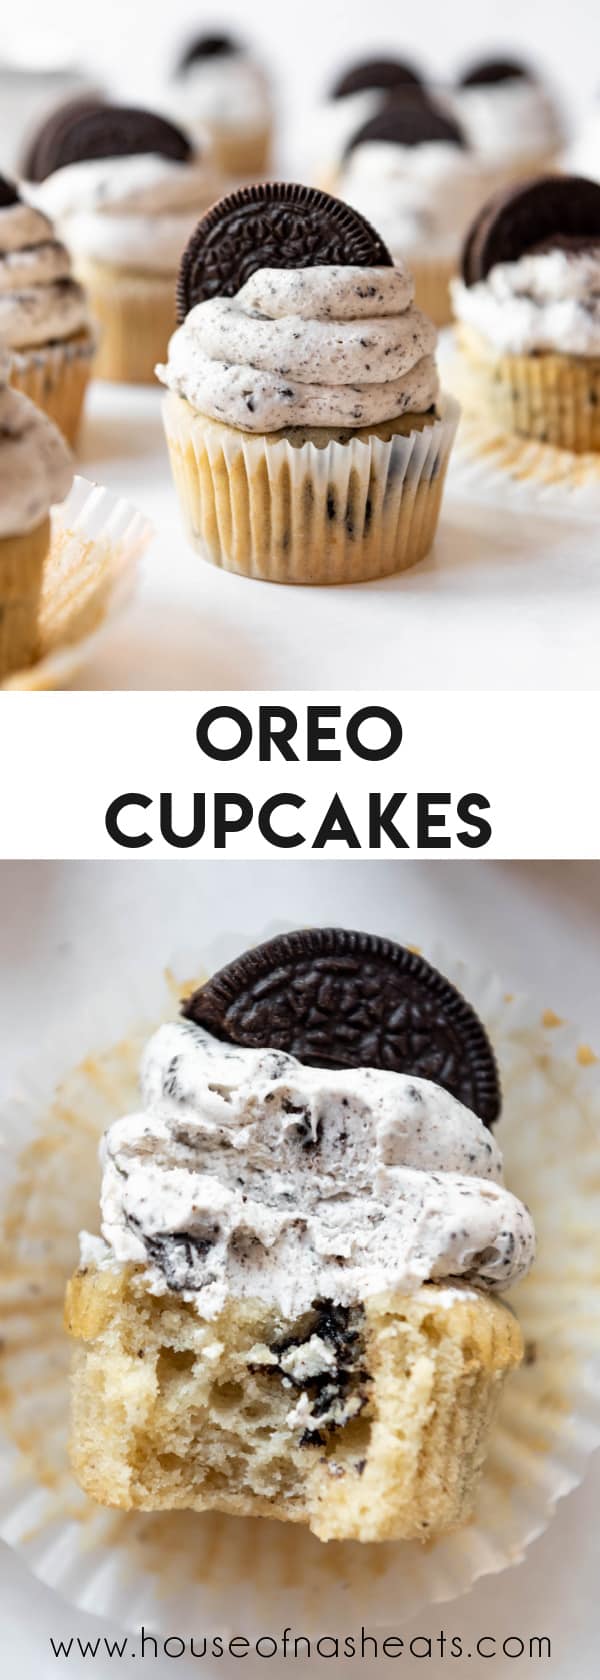 A collage of Oreo cupcake images with text overlay.